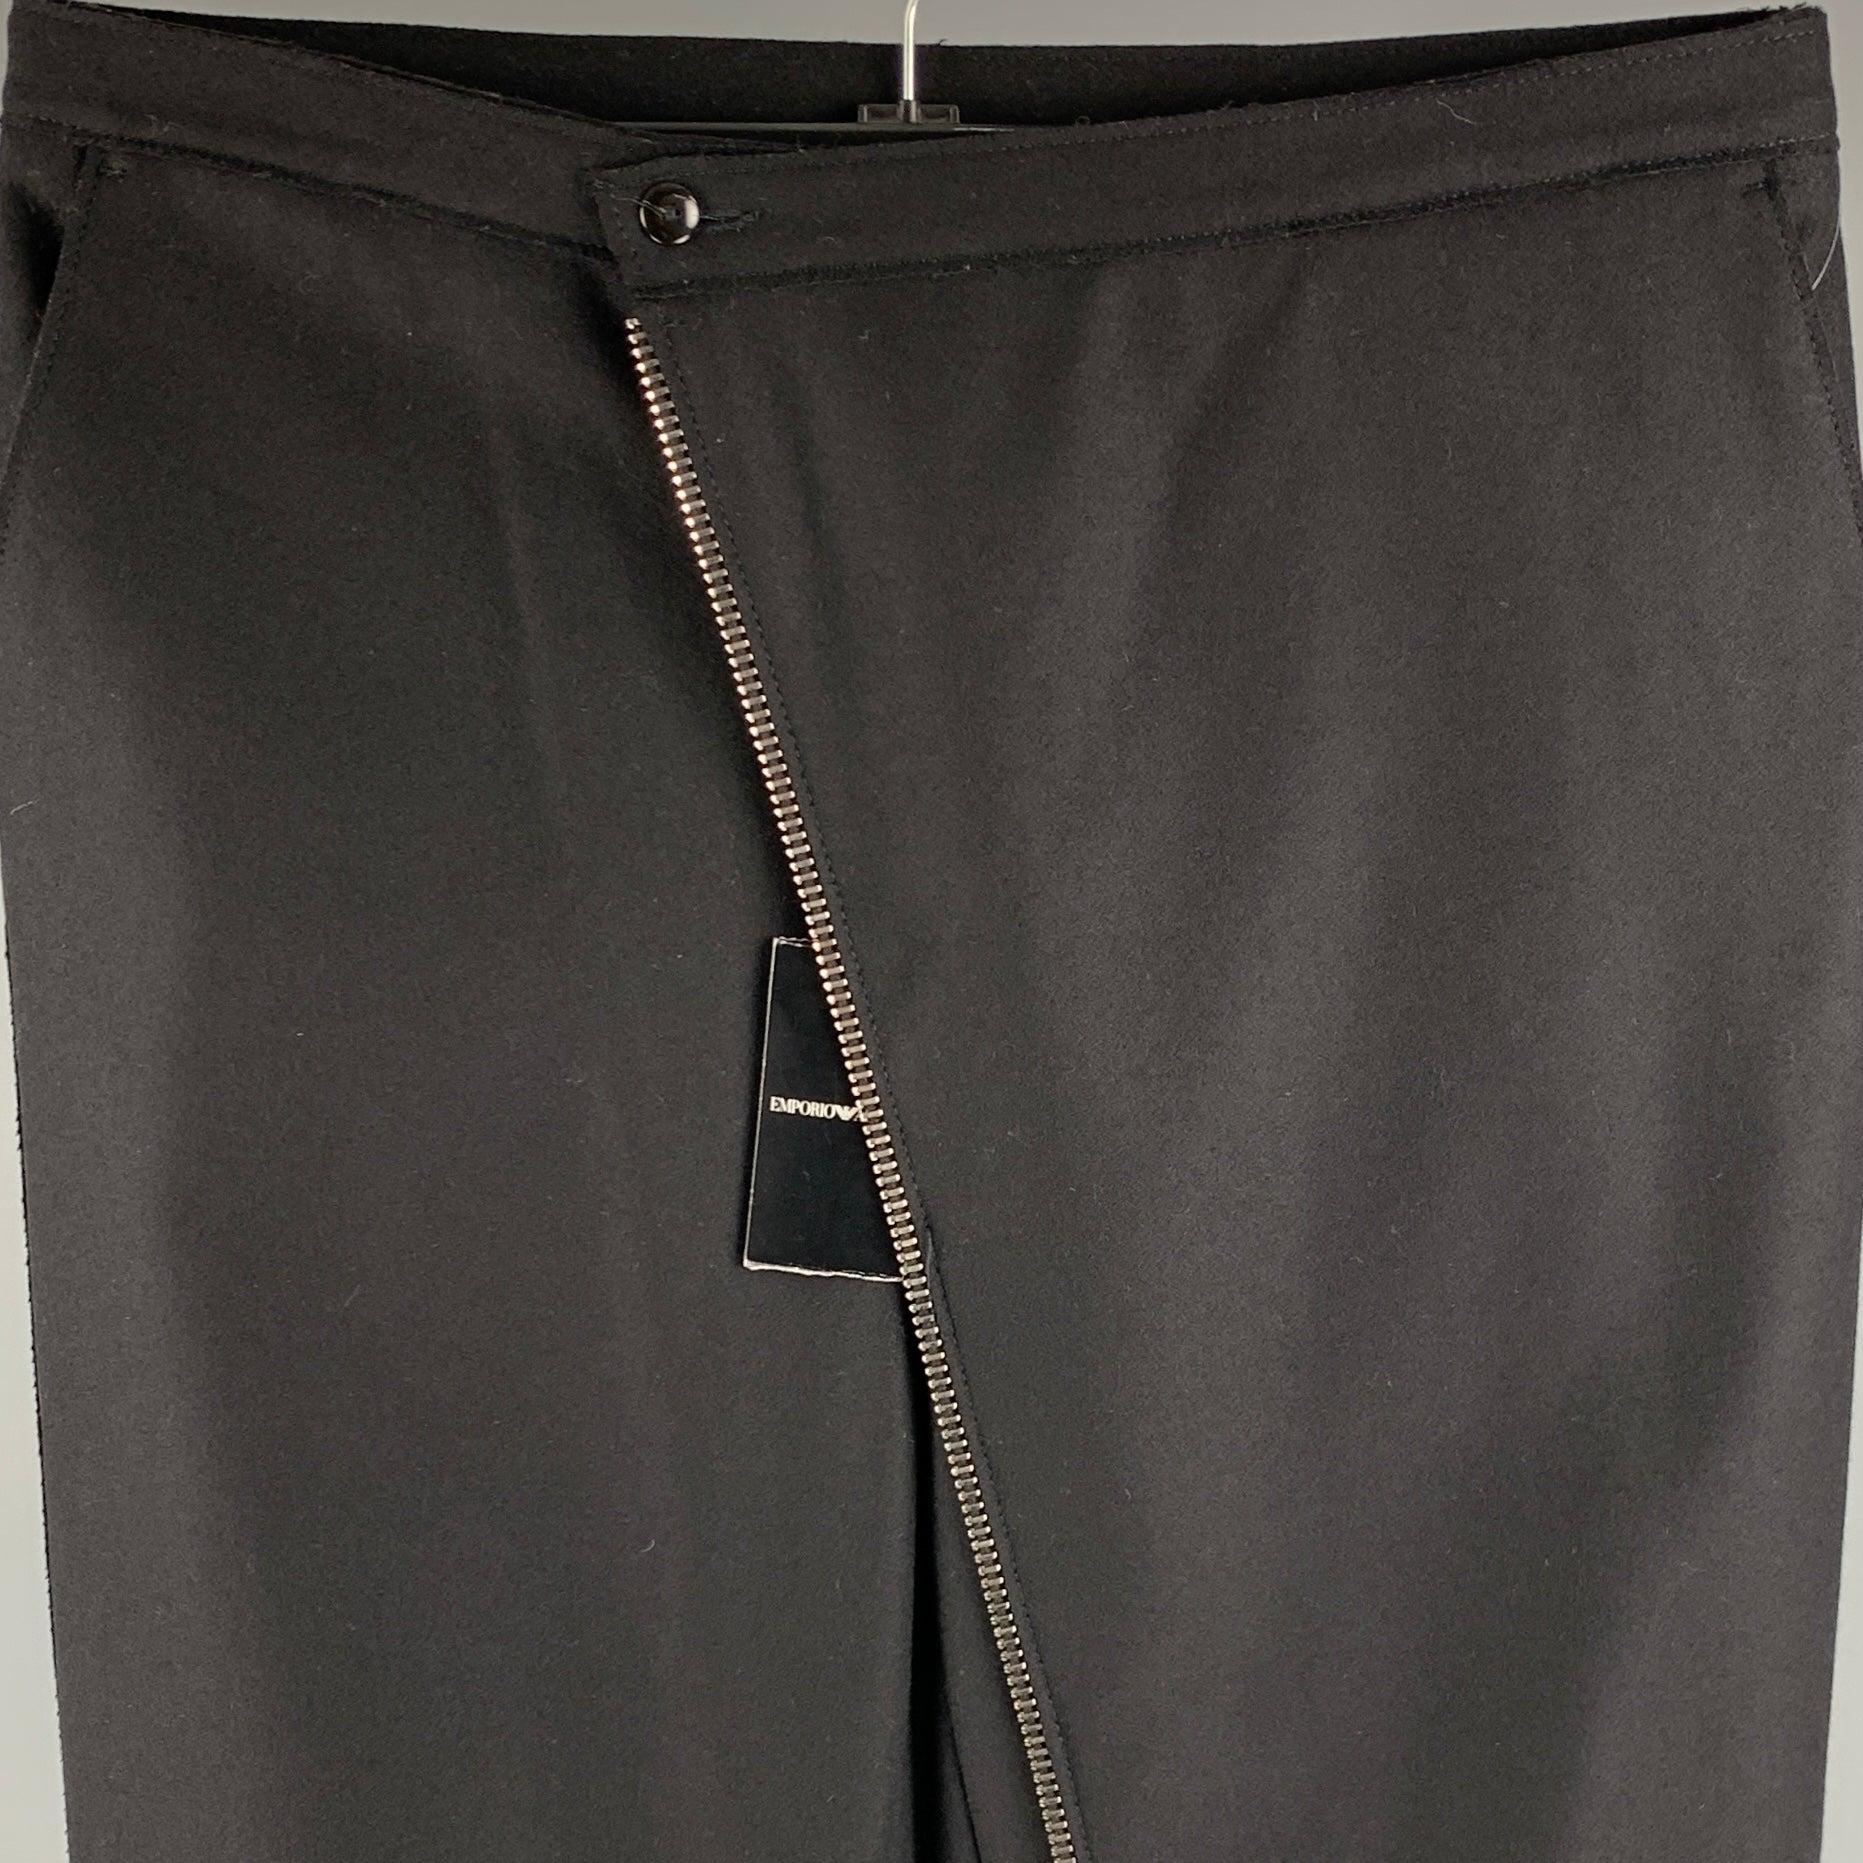 EMPORIO ARMANI dress pants in a black wool blend fabric featuring asymmetrical zipper detail, and zip fly closure. Made in Italy.New with Tags. 

Marked:   IT 50 

Measurements: 
  Waist: 34 inches Rise: 9.5 inches Inseam: 30 inches 
  
  
